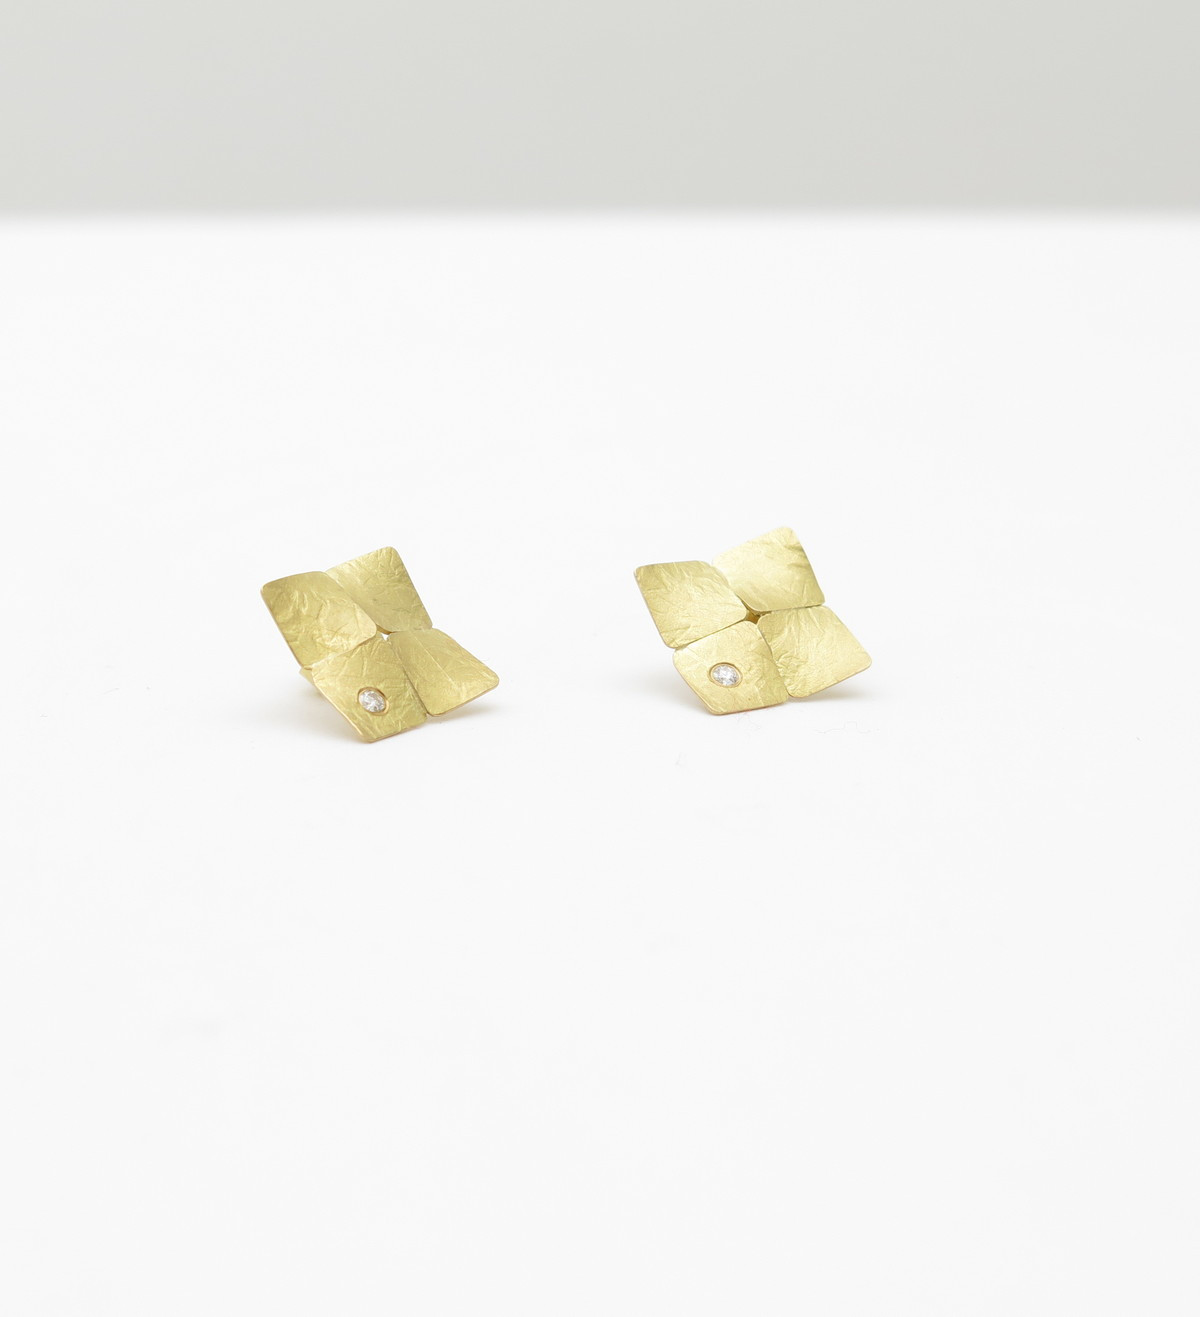 Waves gold earrings with diamonds